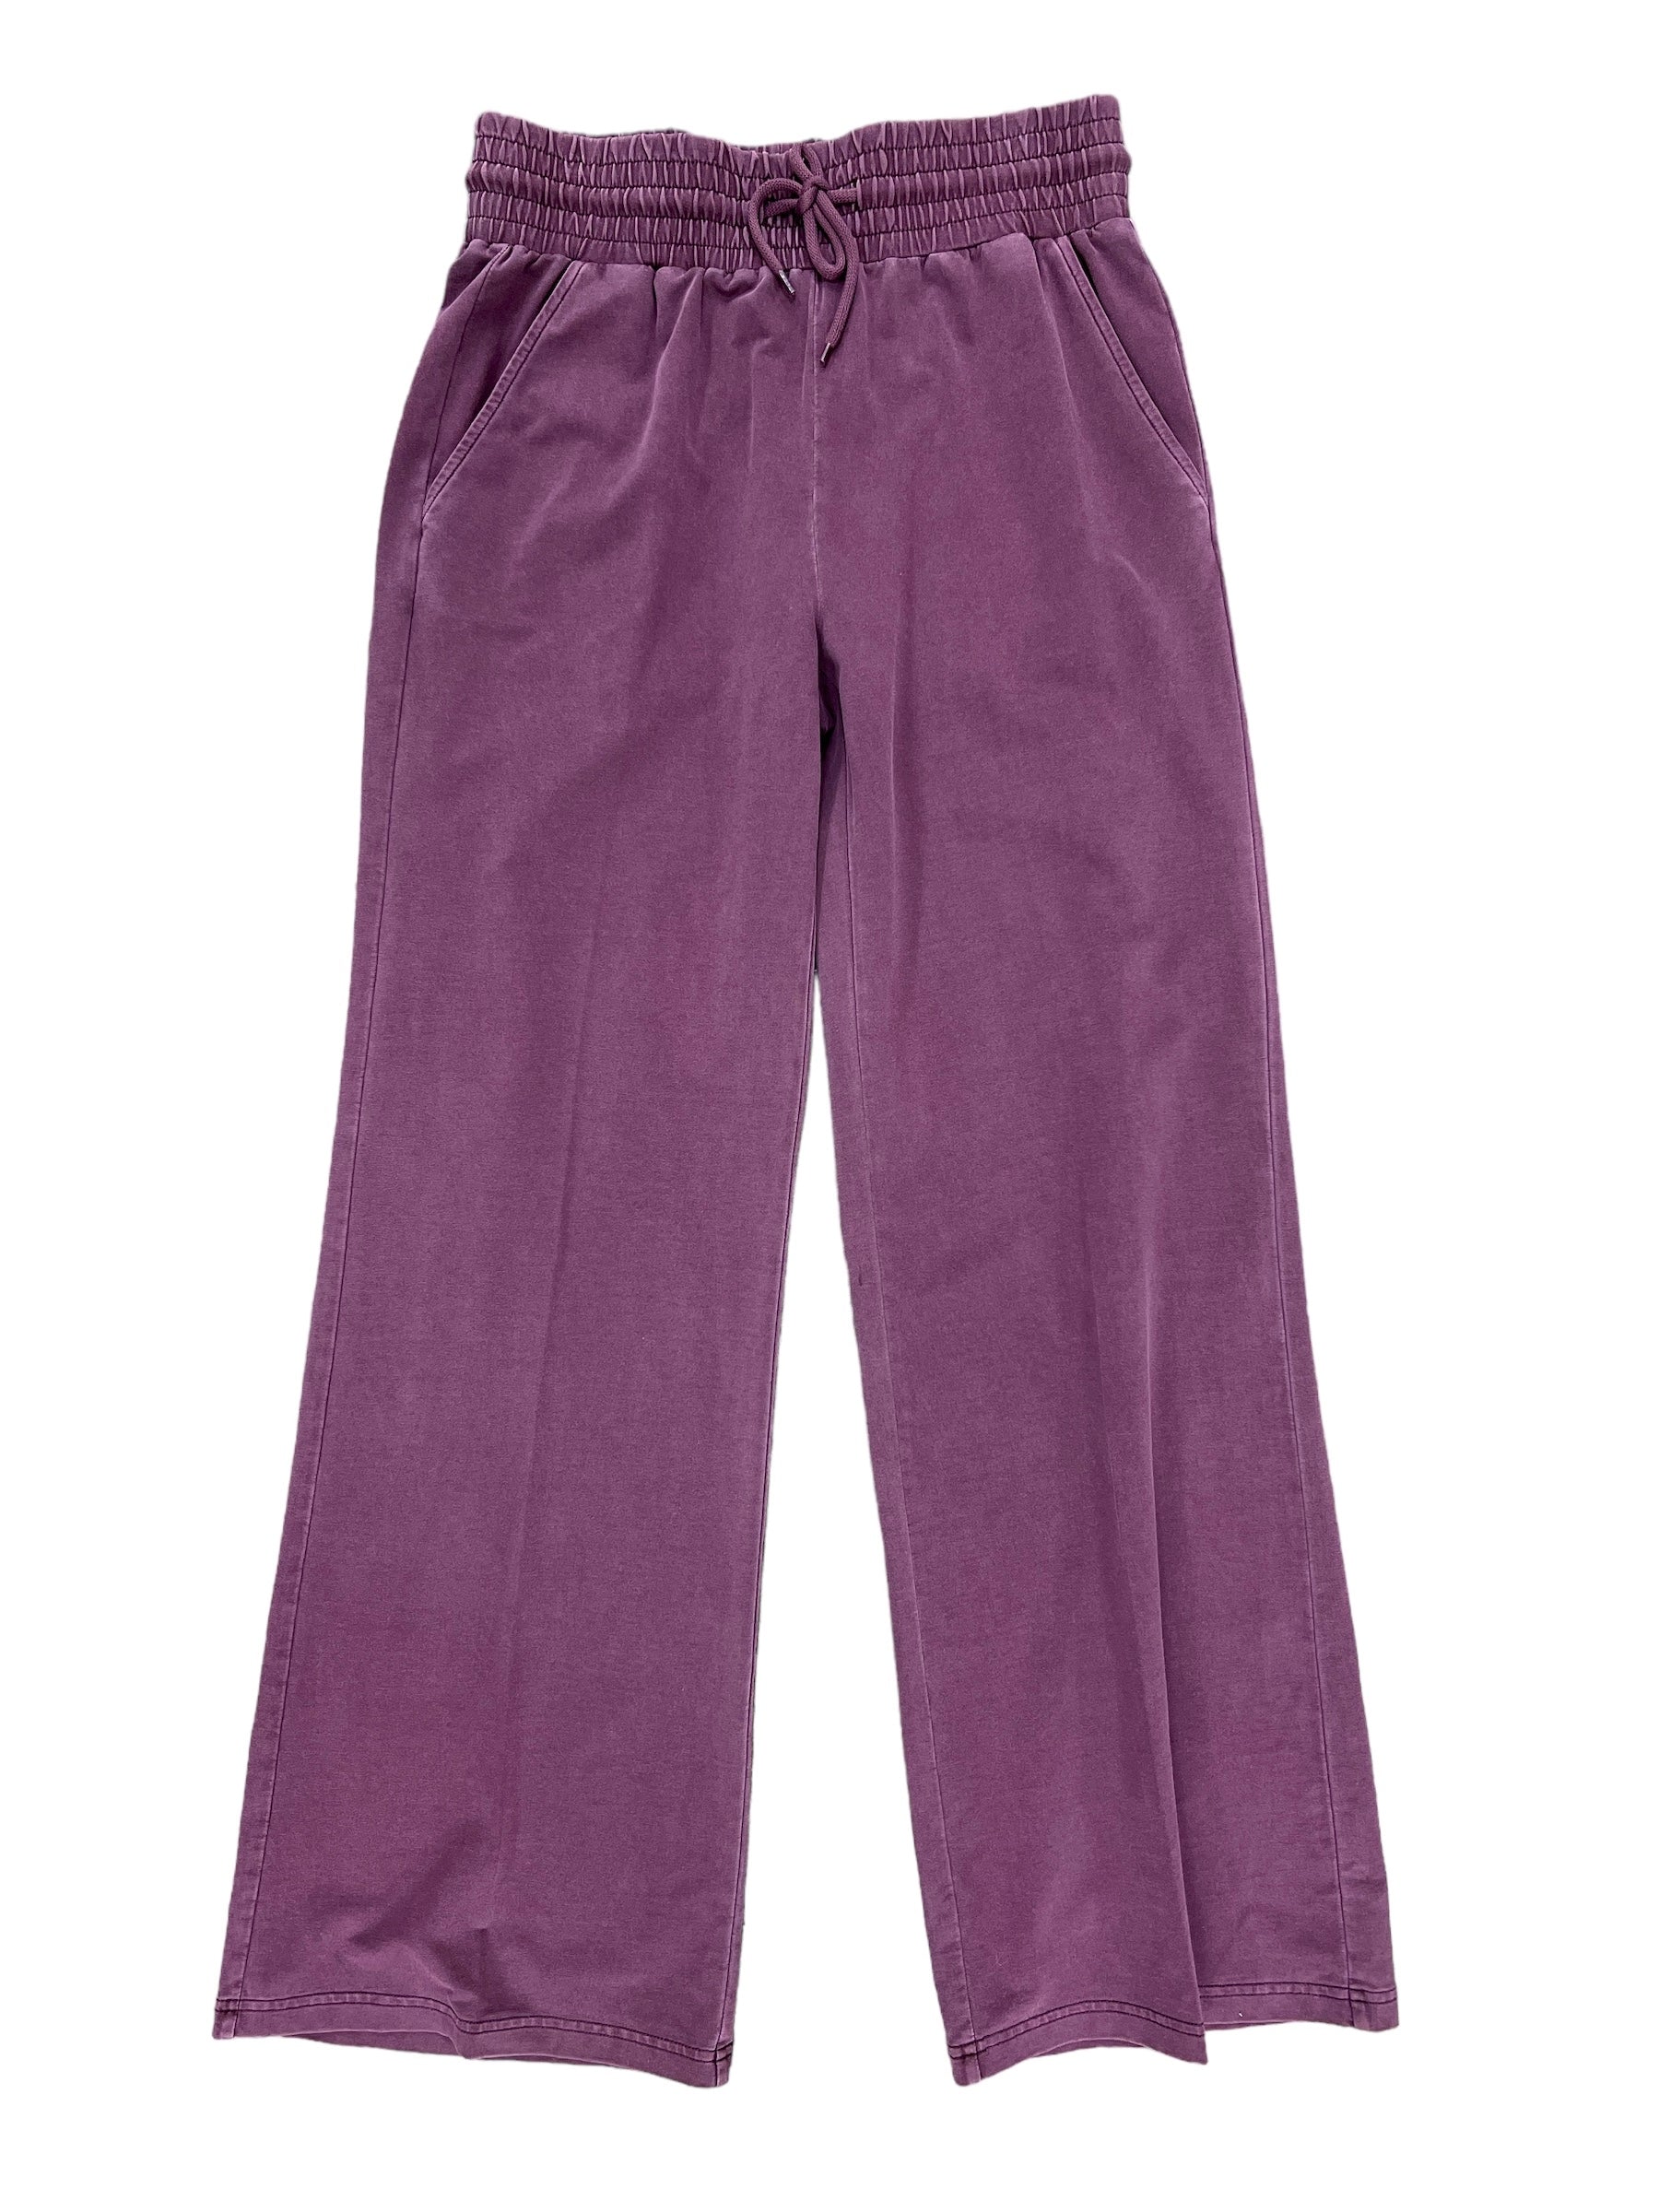 Qunicy Pant-230 Pants-Simply Stylish Boutique-Simply Stylish Boutique | Women’s & Kid’s Fashion | Paducah, KY